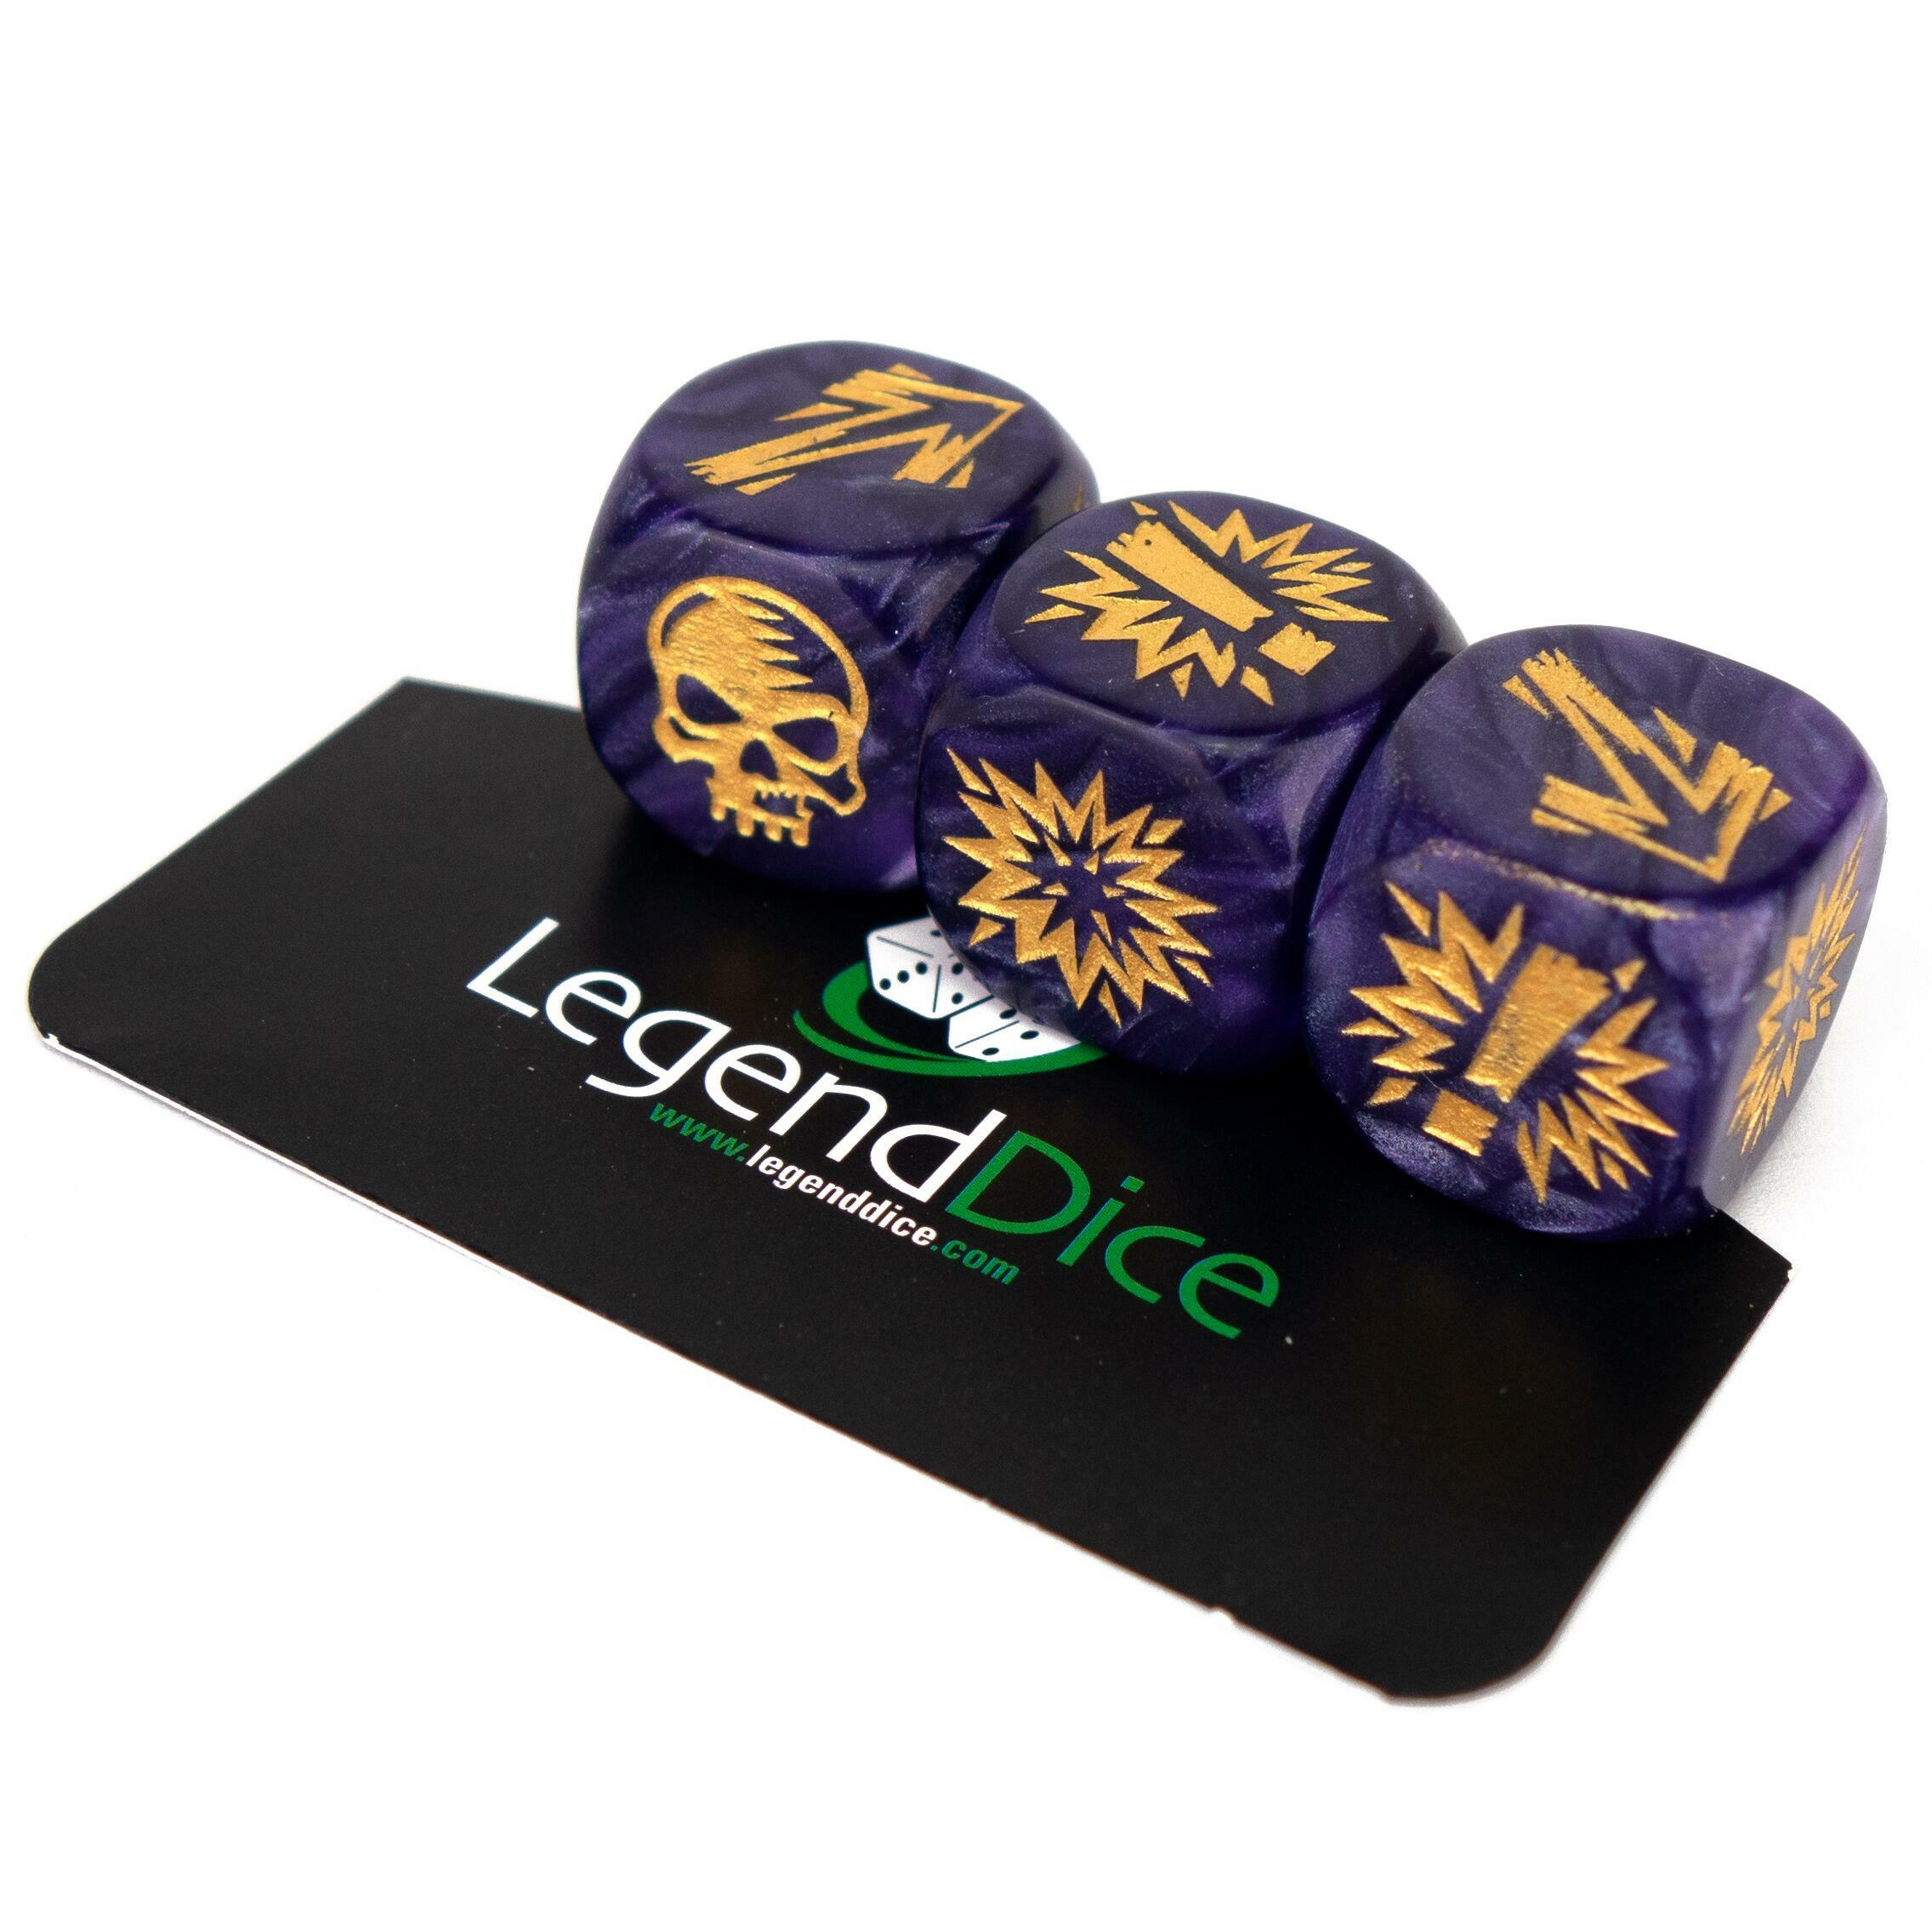 Picture of Blocking Dice Set - Pearl Purple (Gold) with bag